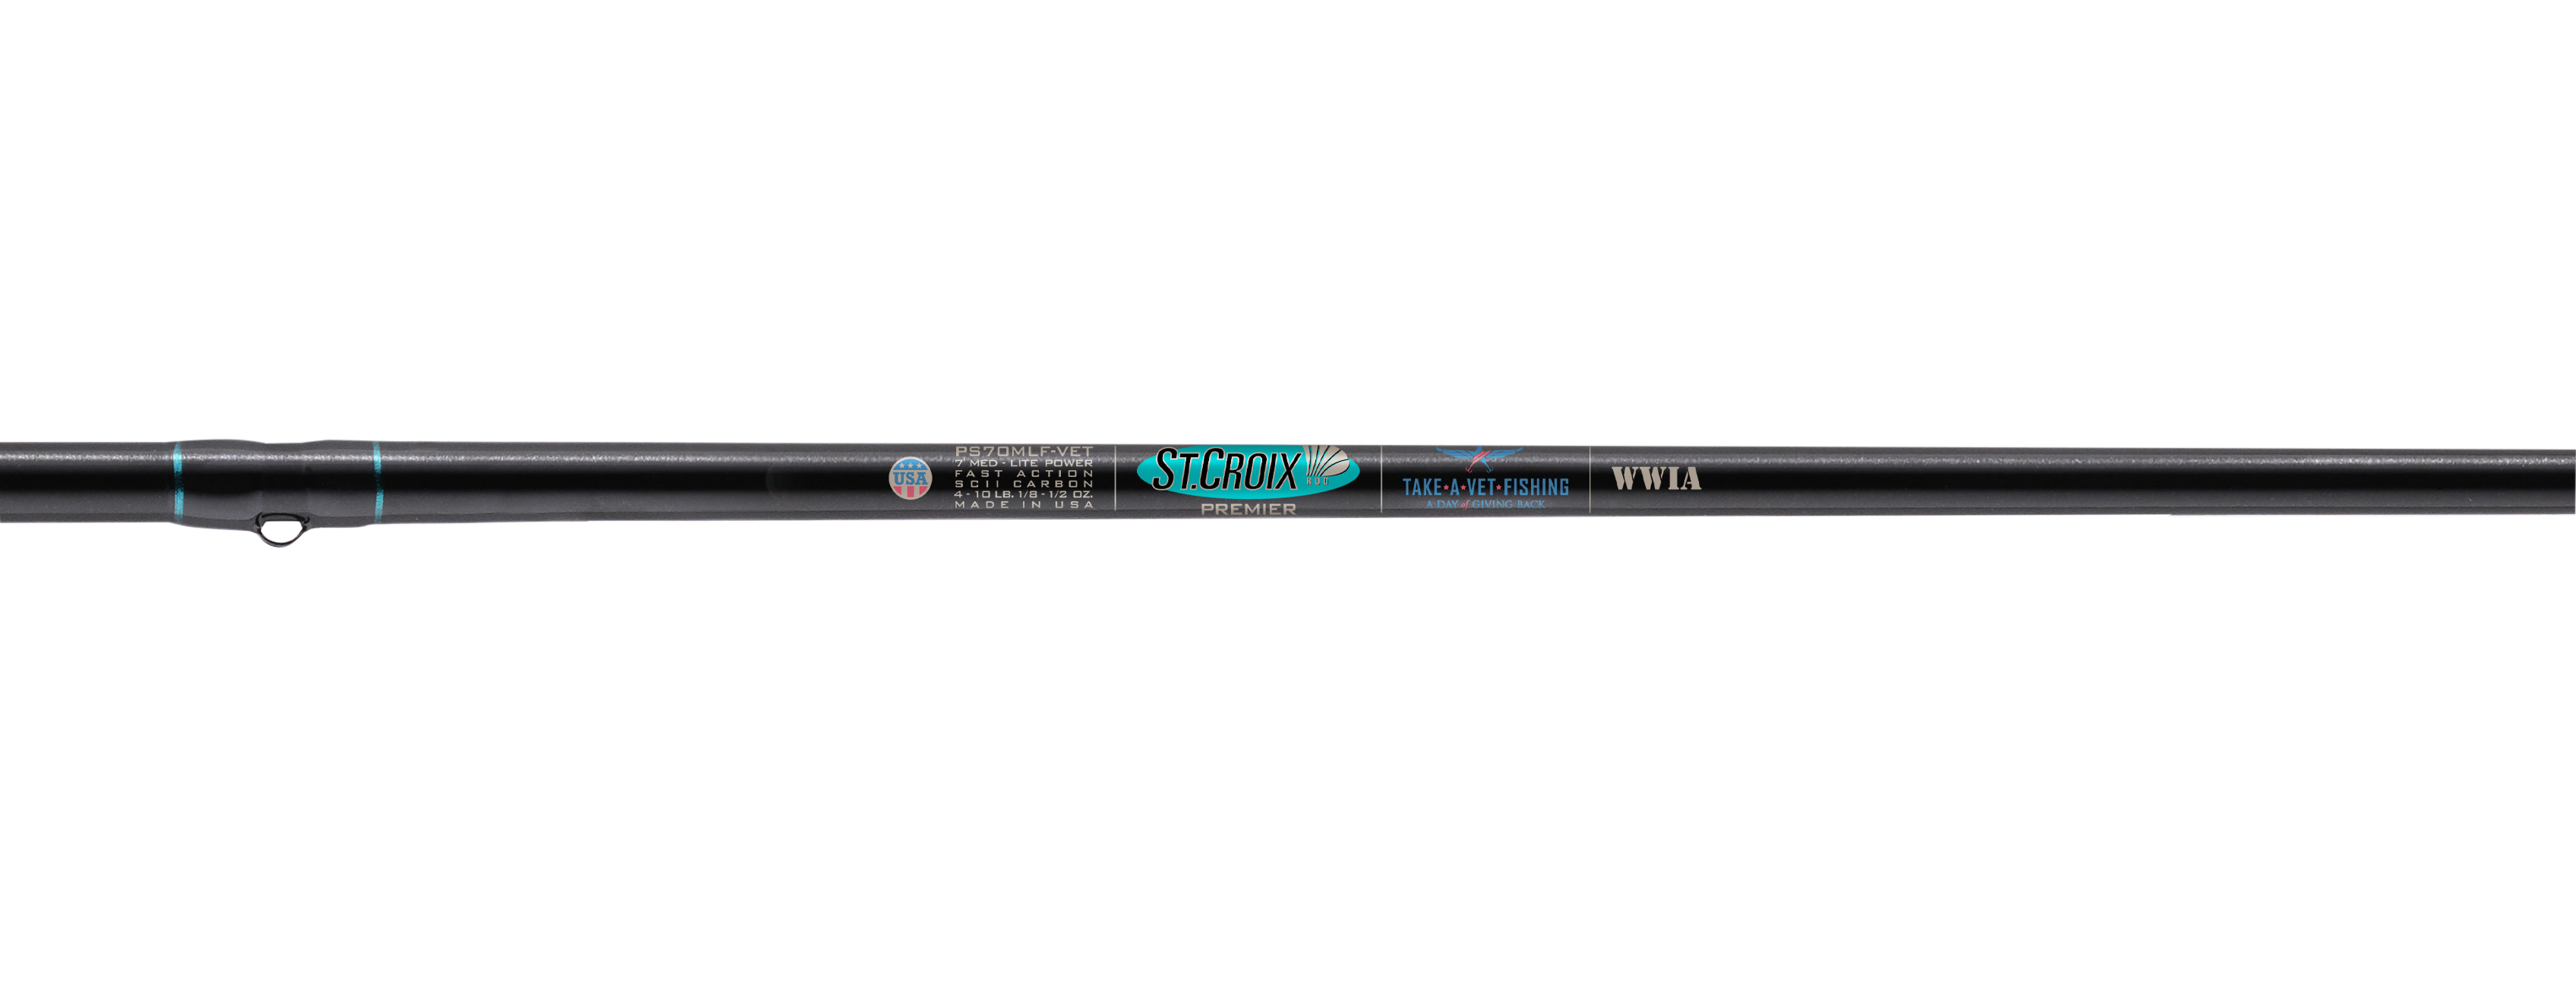 St Croix Rift and Avid Inshore Rod Giveaway - On The Water